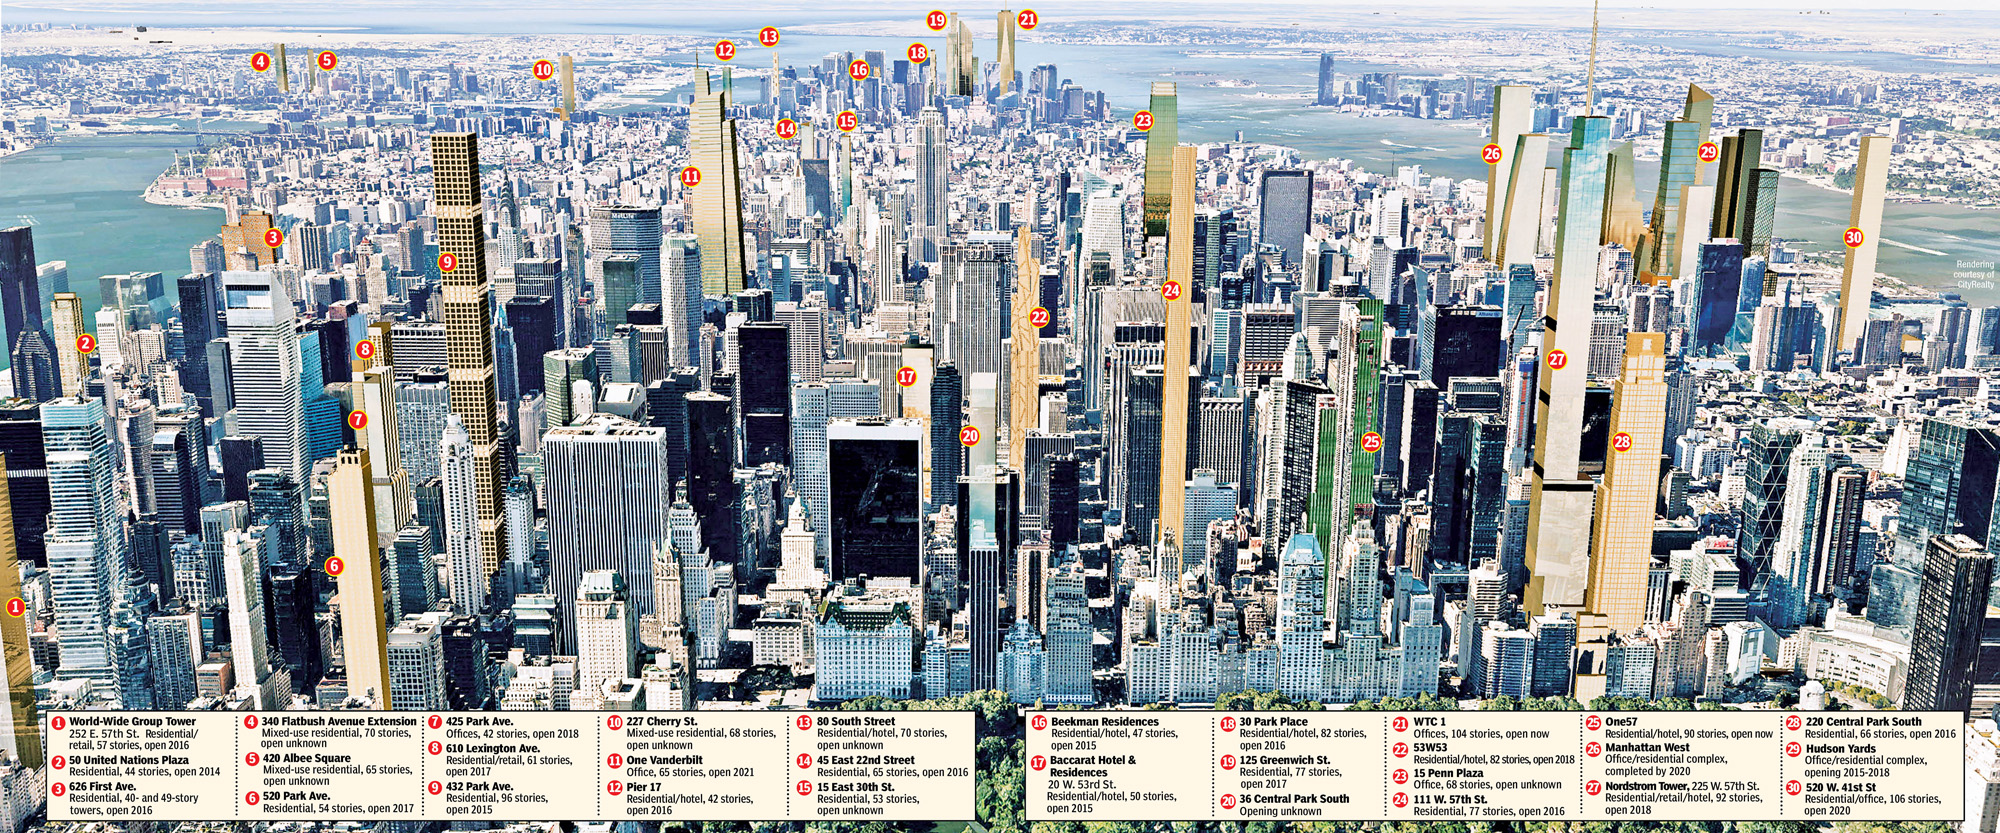 NYC's skyline will be radically different in 2018 | New York Post